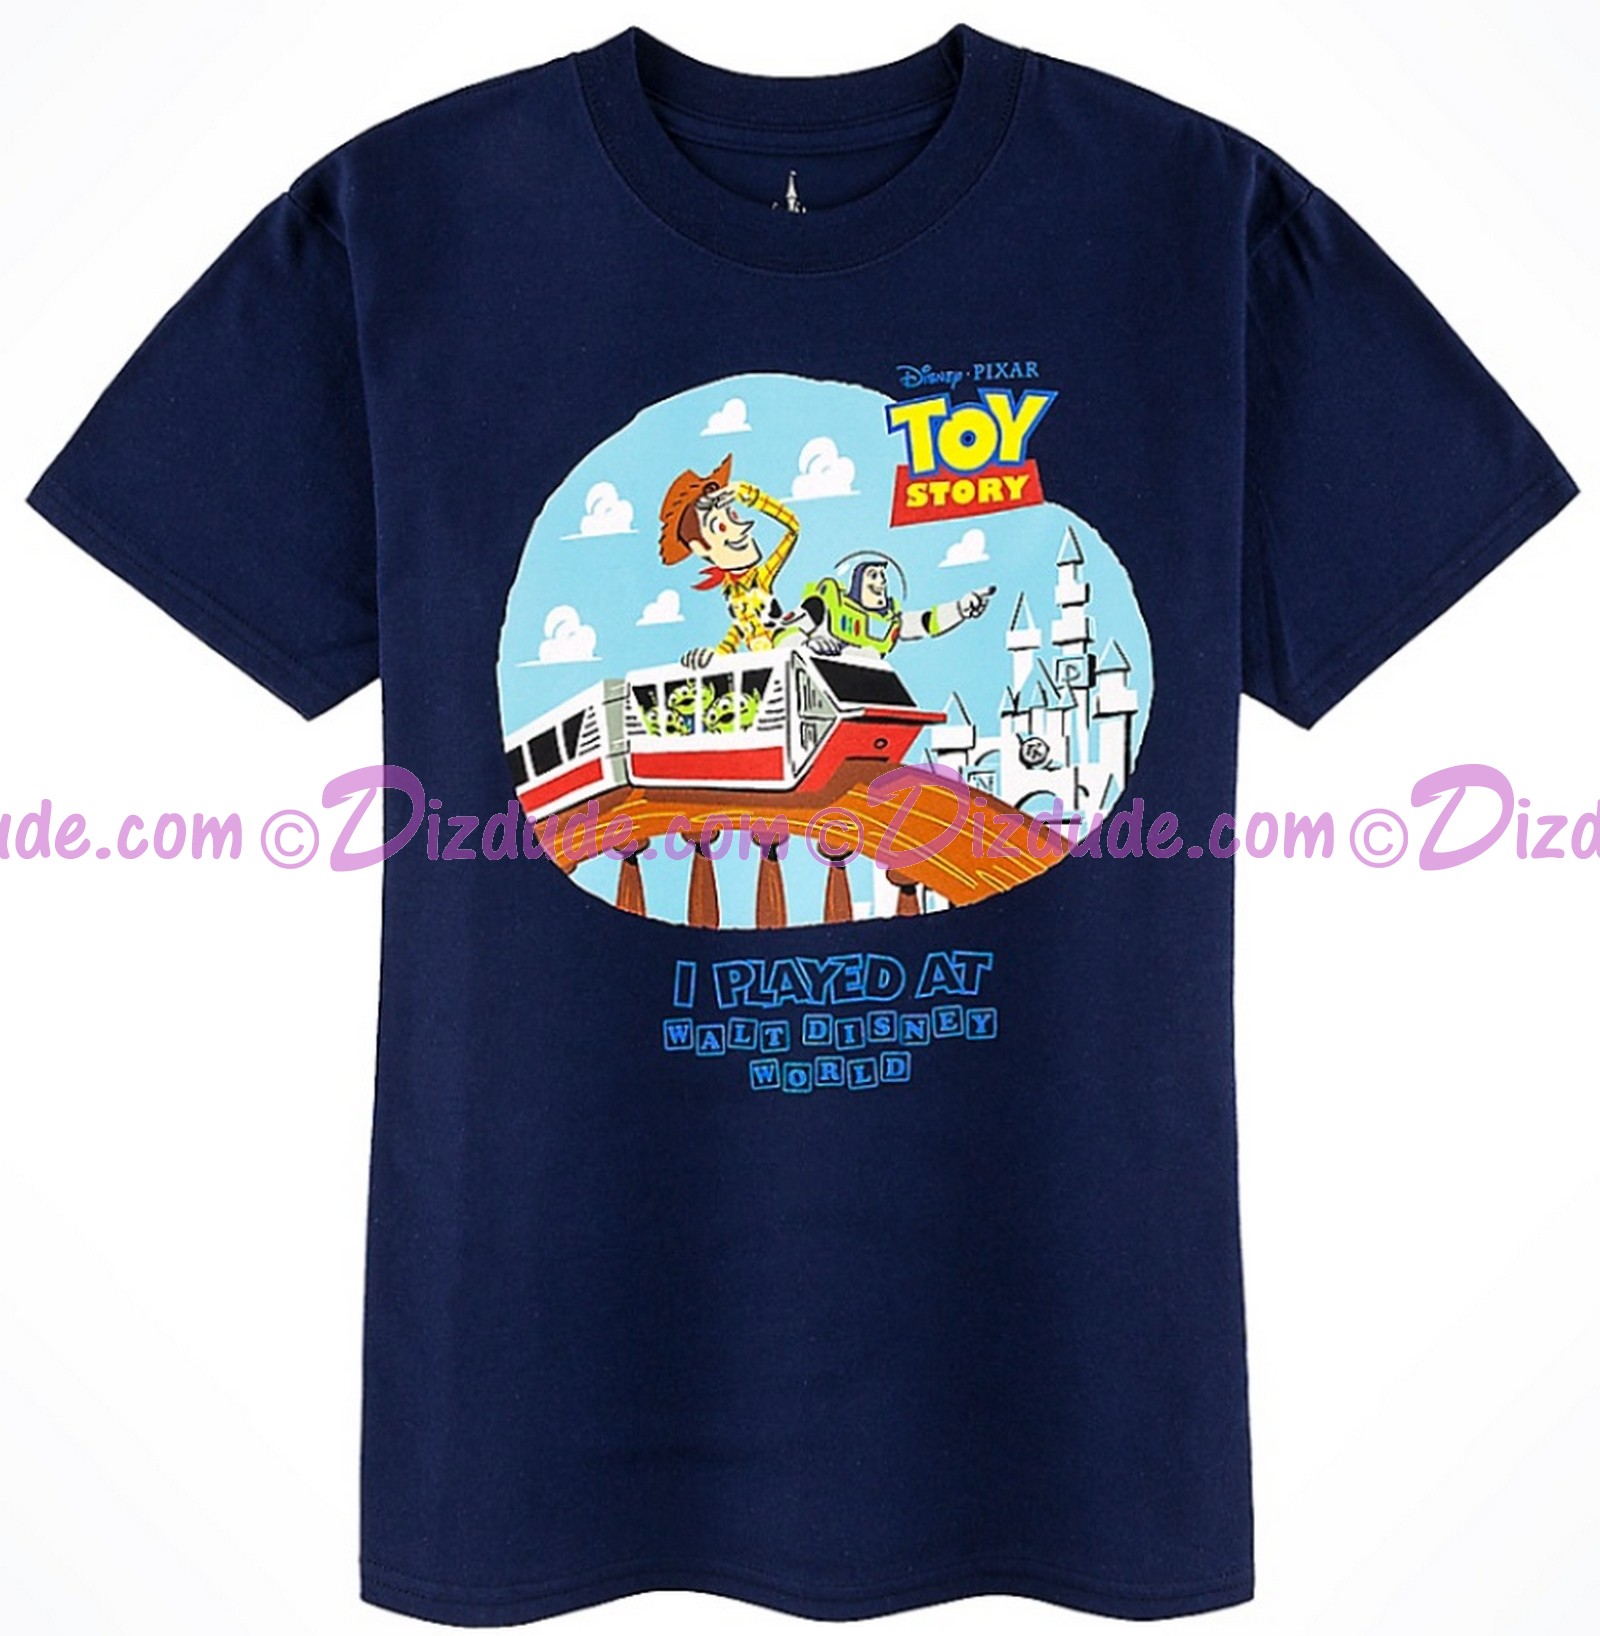 (SOLD OUT) I played At Walt Disney World Youth T-shirt (Tee, Tshirt or T shirt) - Disney's Toy Story Land